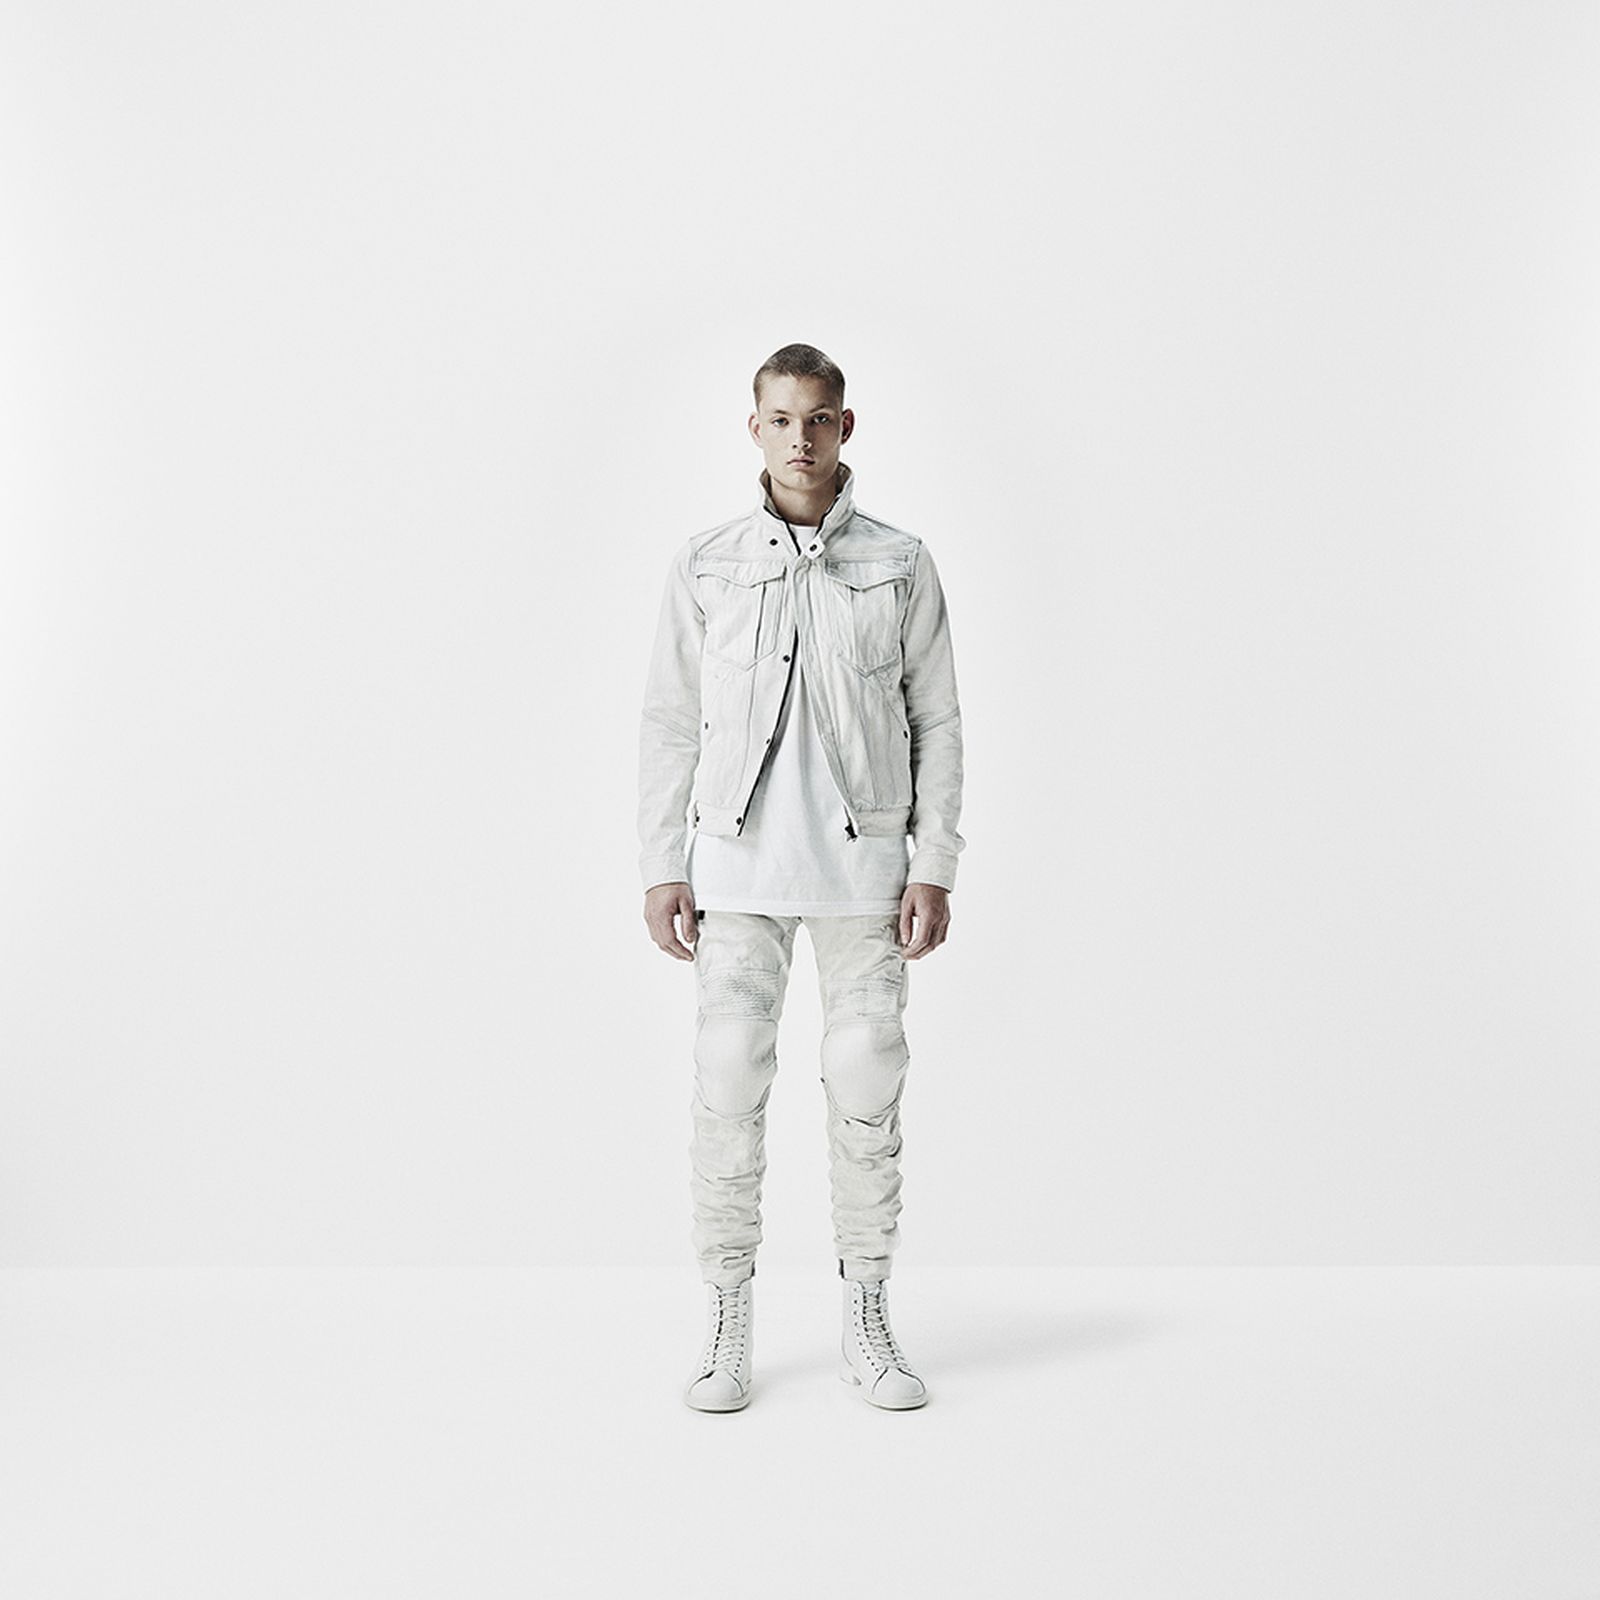 gstar-raw-research-aitor-throup-24